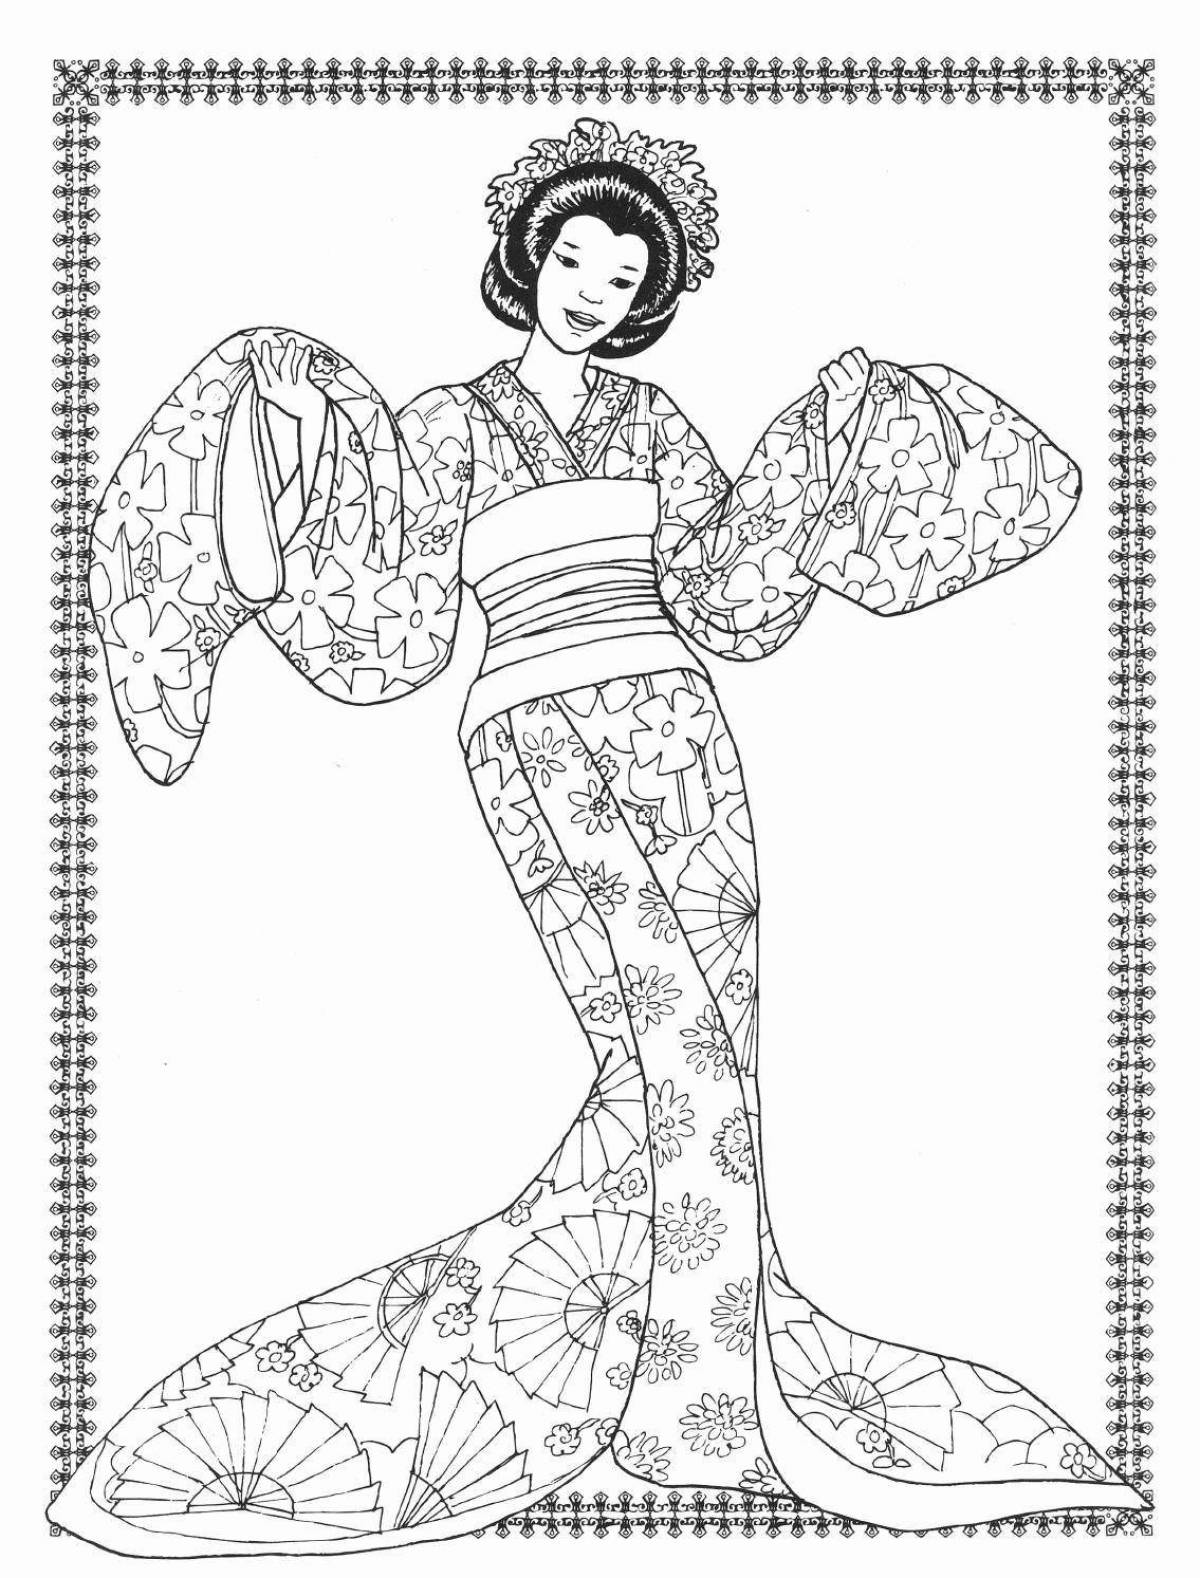 Attractive Chinese coloring book